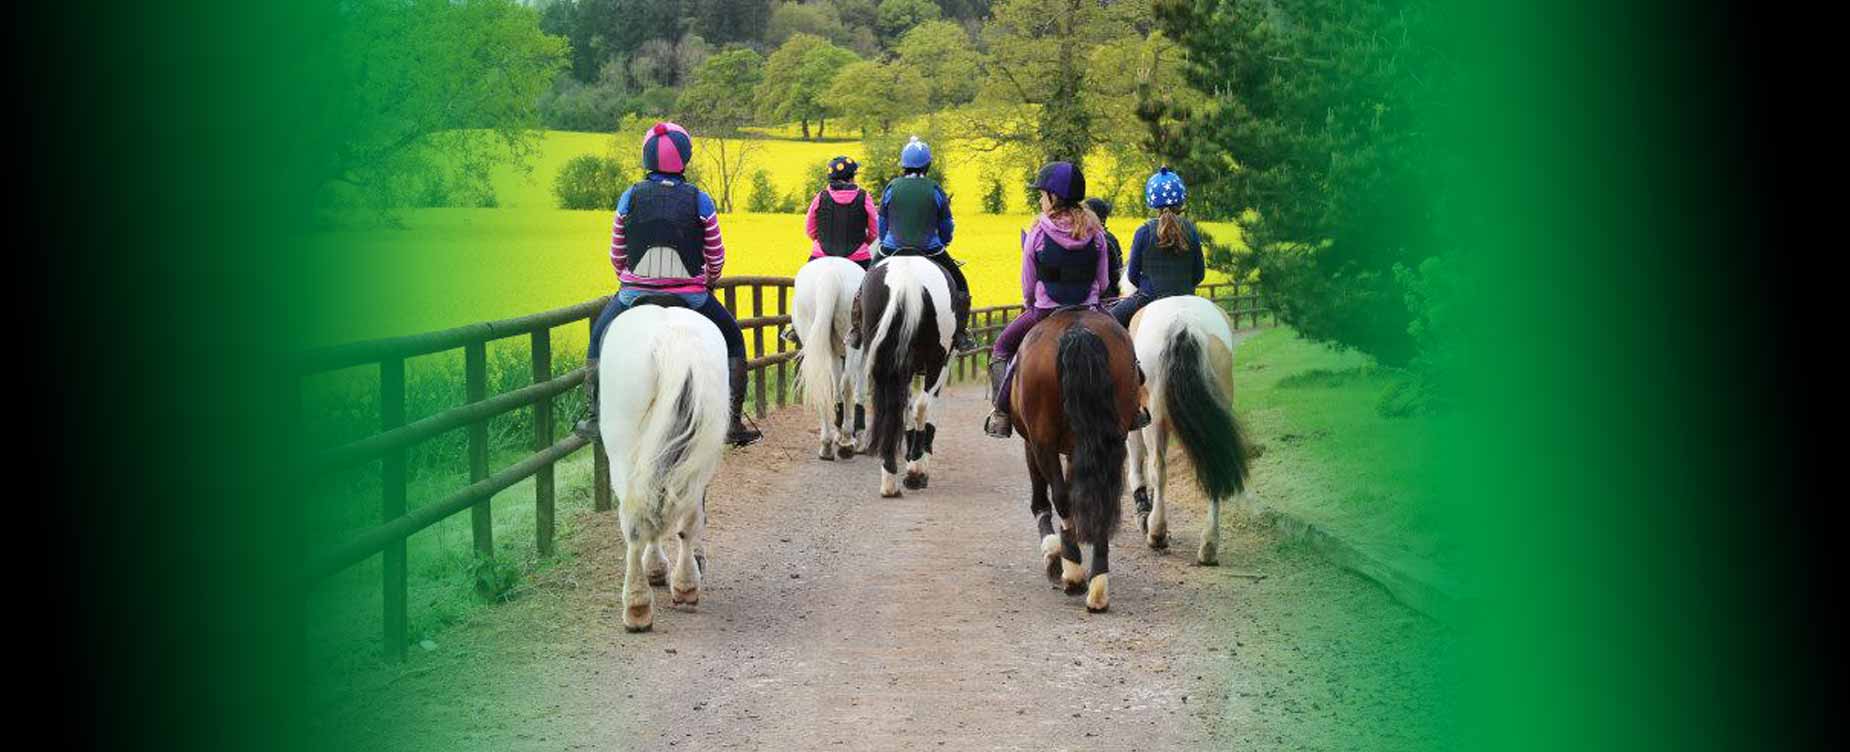 Our aim is to offer your horse the finest choice as nature intended